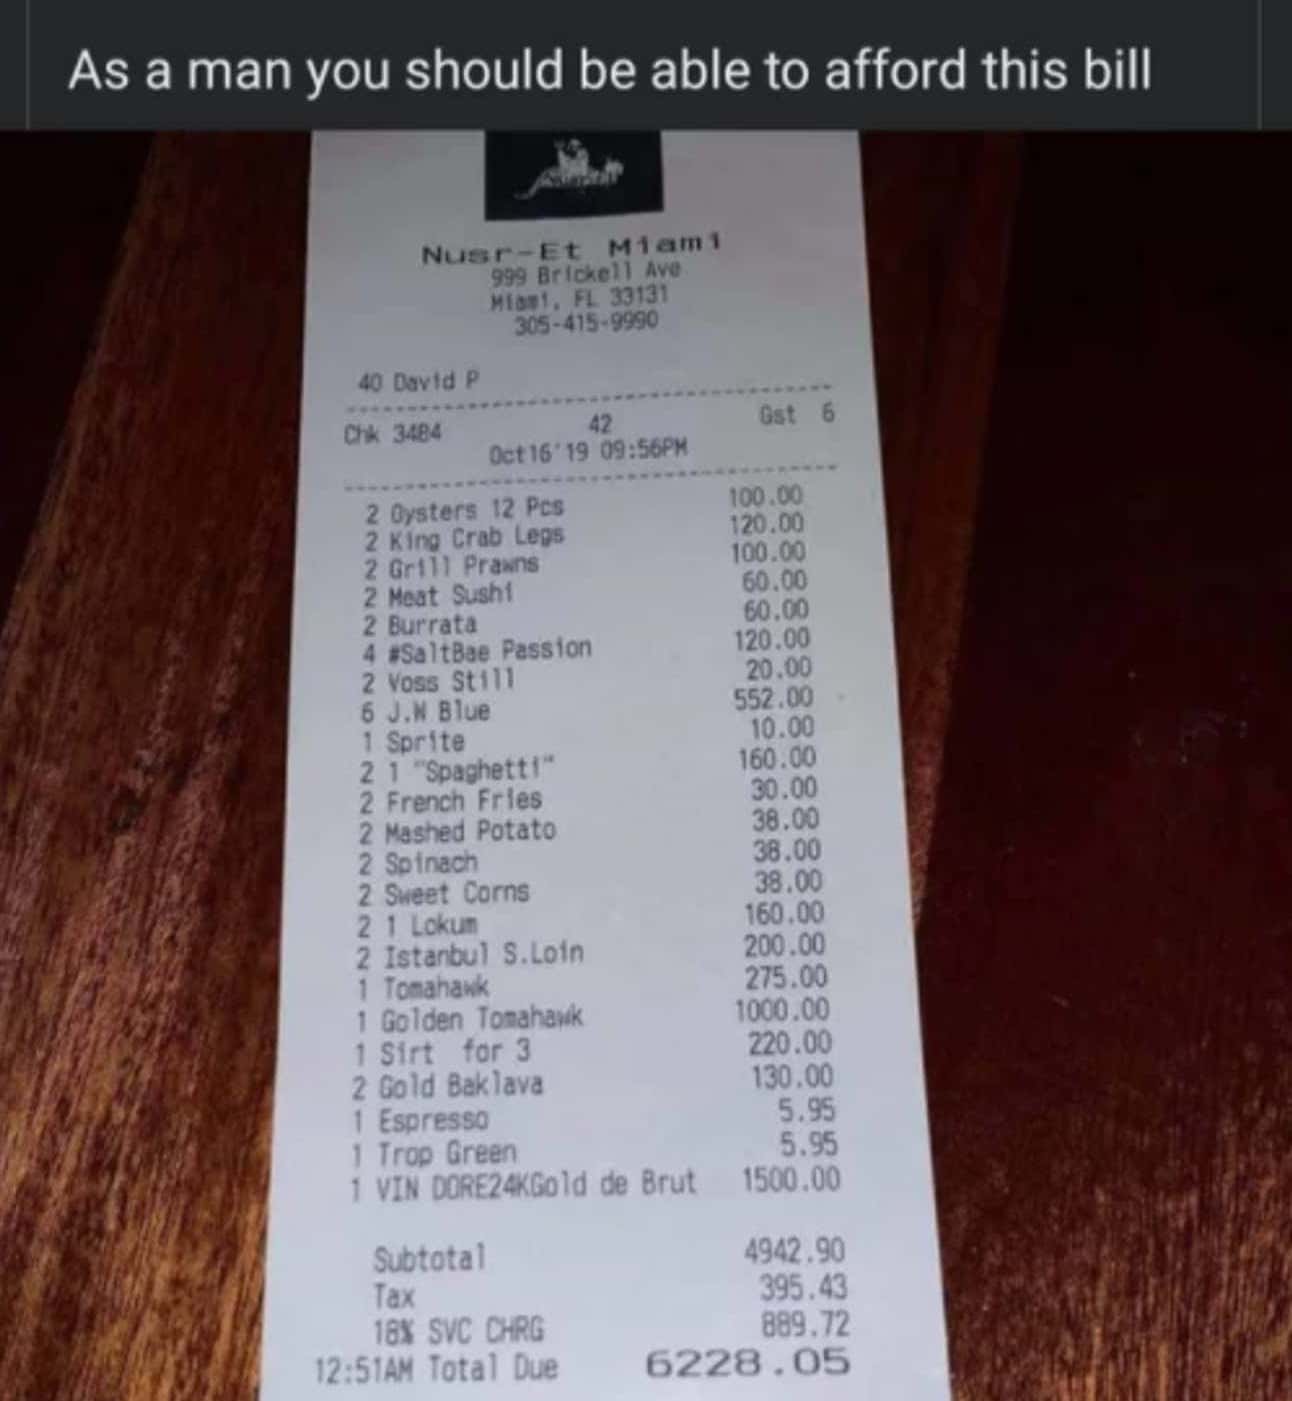 Entitled People - salt bae restaurant los angeles prices - As a man you should be able to afford this bill NusrEt Miam1 999 Brickell Ave Miami, Fl 33131 3054159990 40 David P Chk 3484 42 Gst 6 Oct 16' 19 Pm 2 Oysters 12 Pcs 100.00 2 King Crab Legs 120.00 